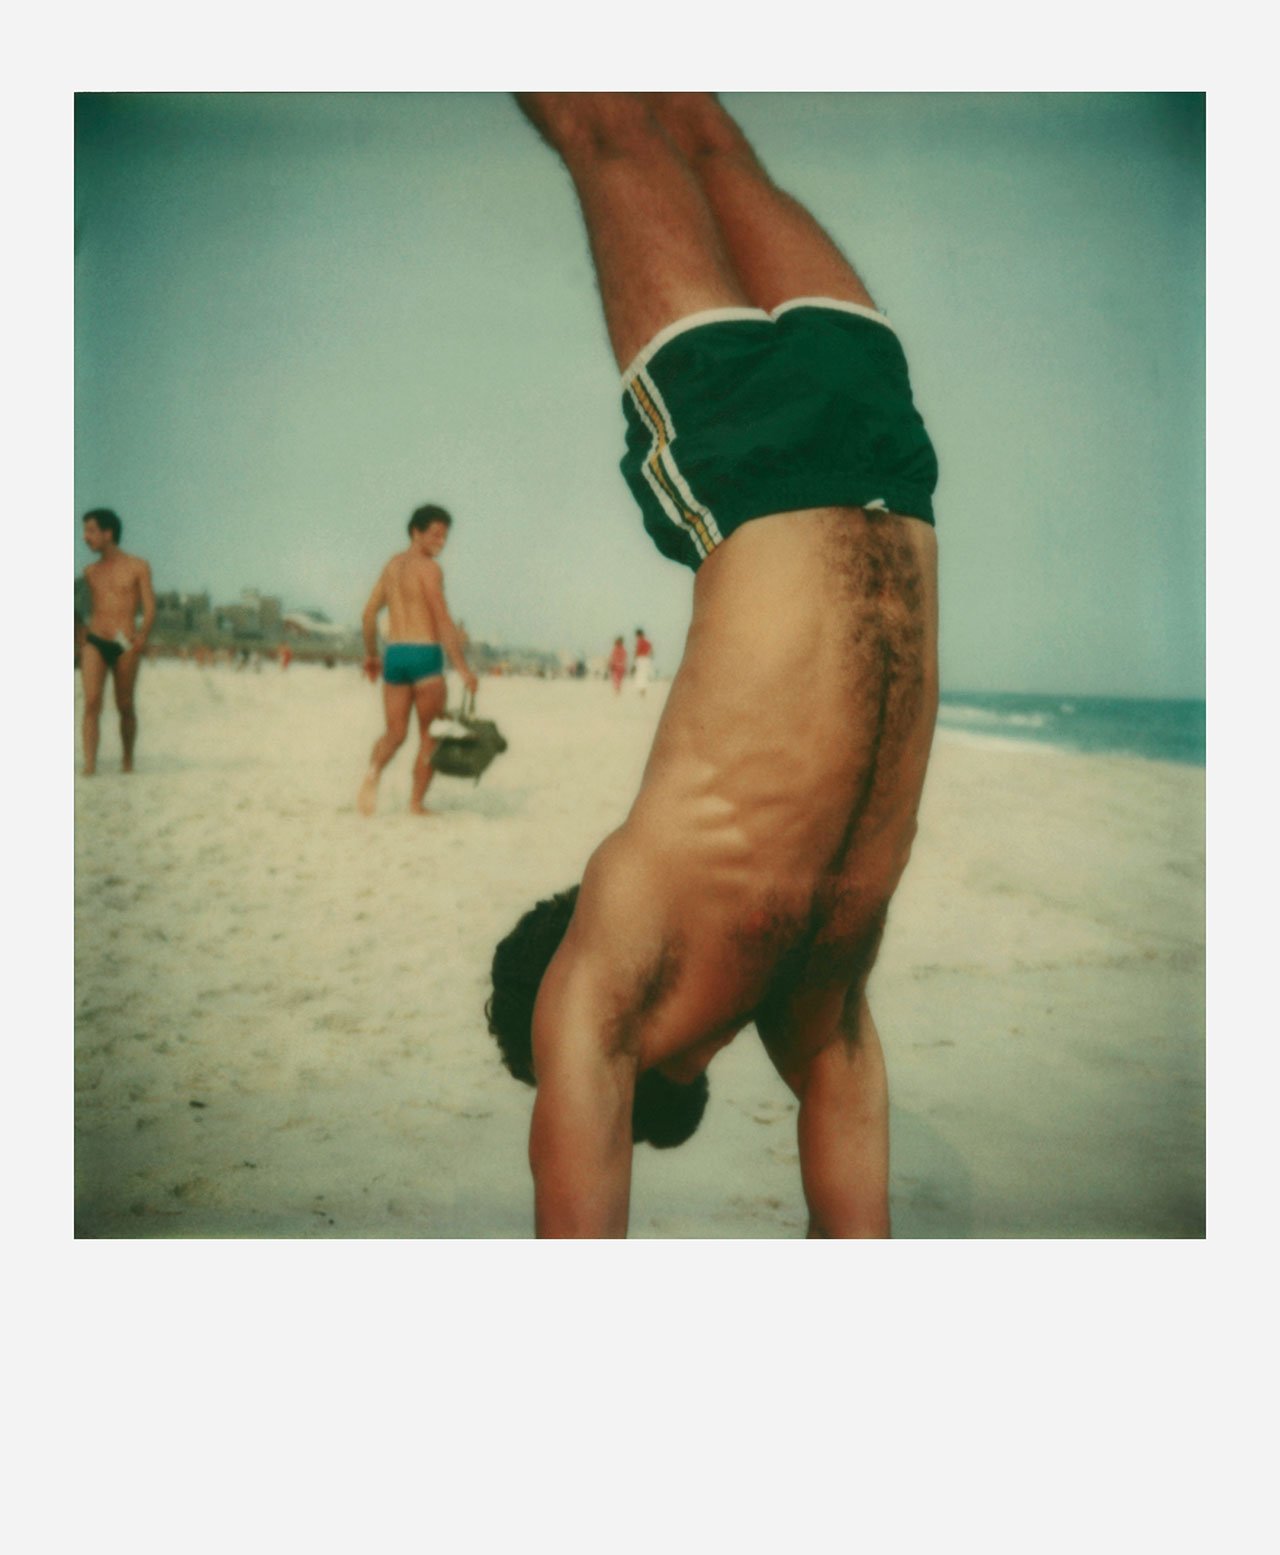 Tom Bianchi, Untitled, 368, Fire Island Pines, 1975-1983.
© Tom Bianchi, Courtesy of Fahey Klein Gallery, Los Angeles.